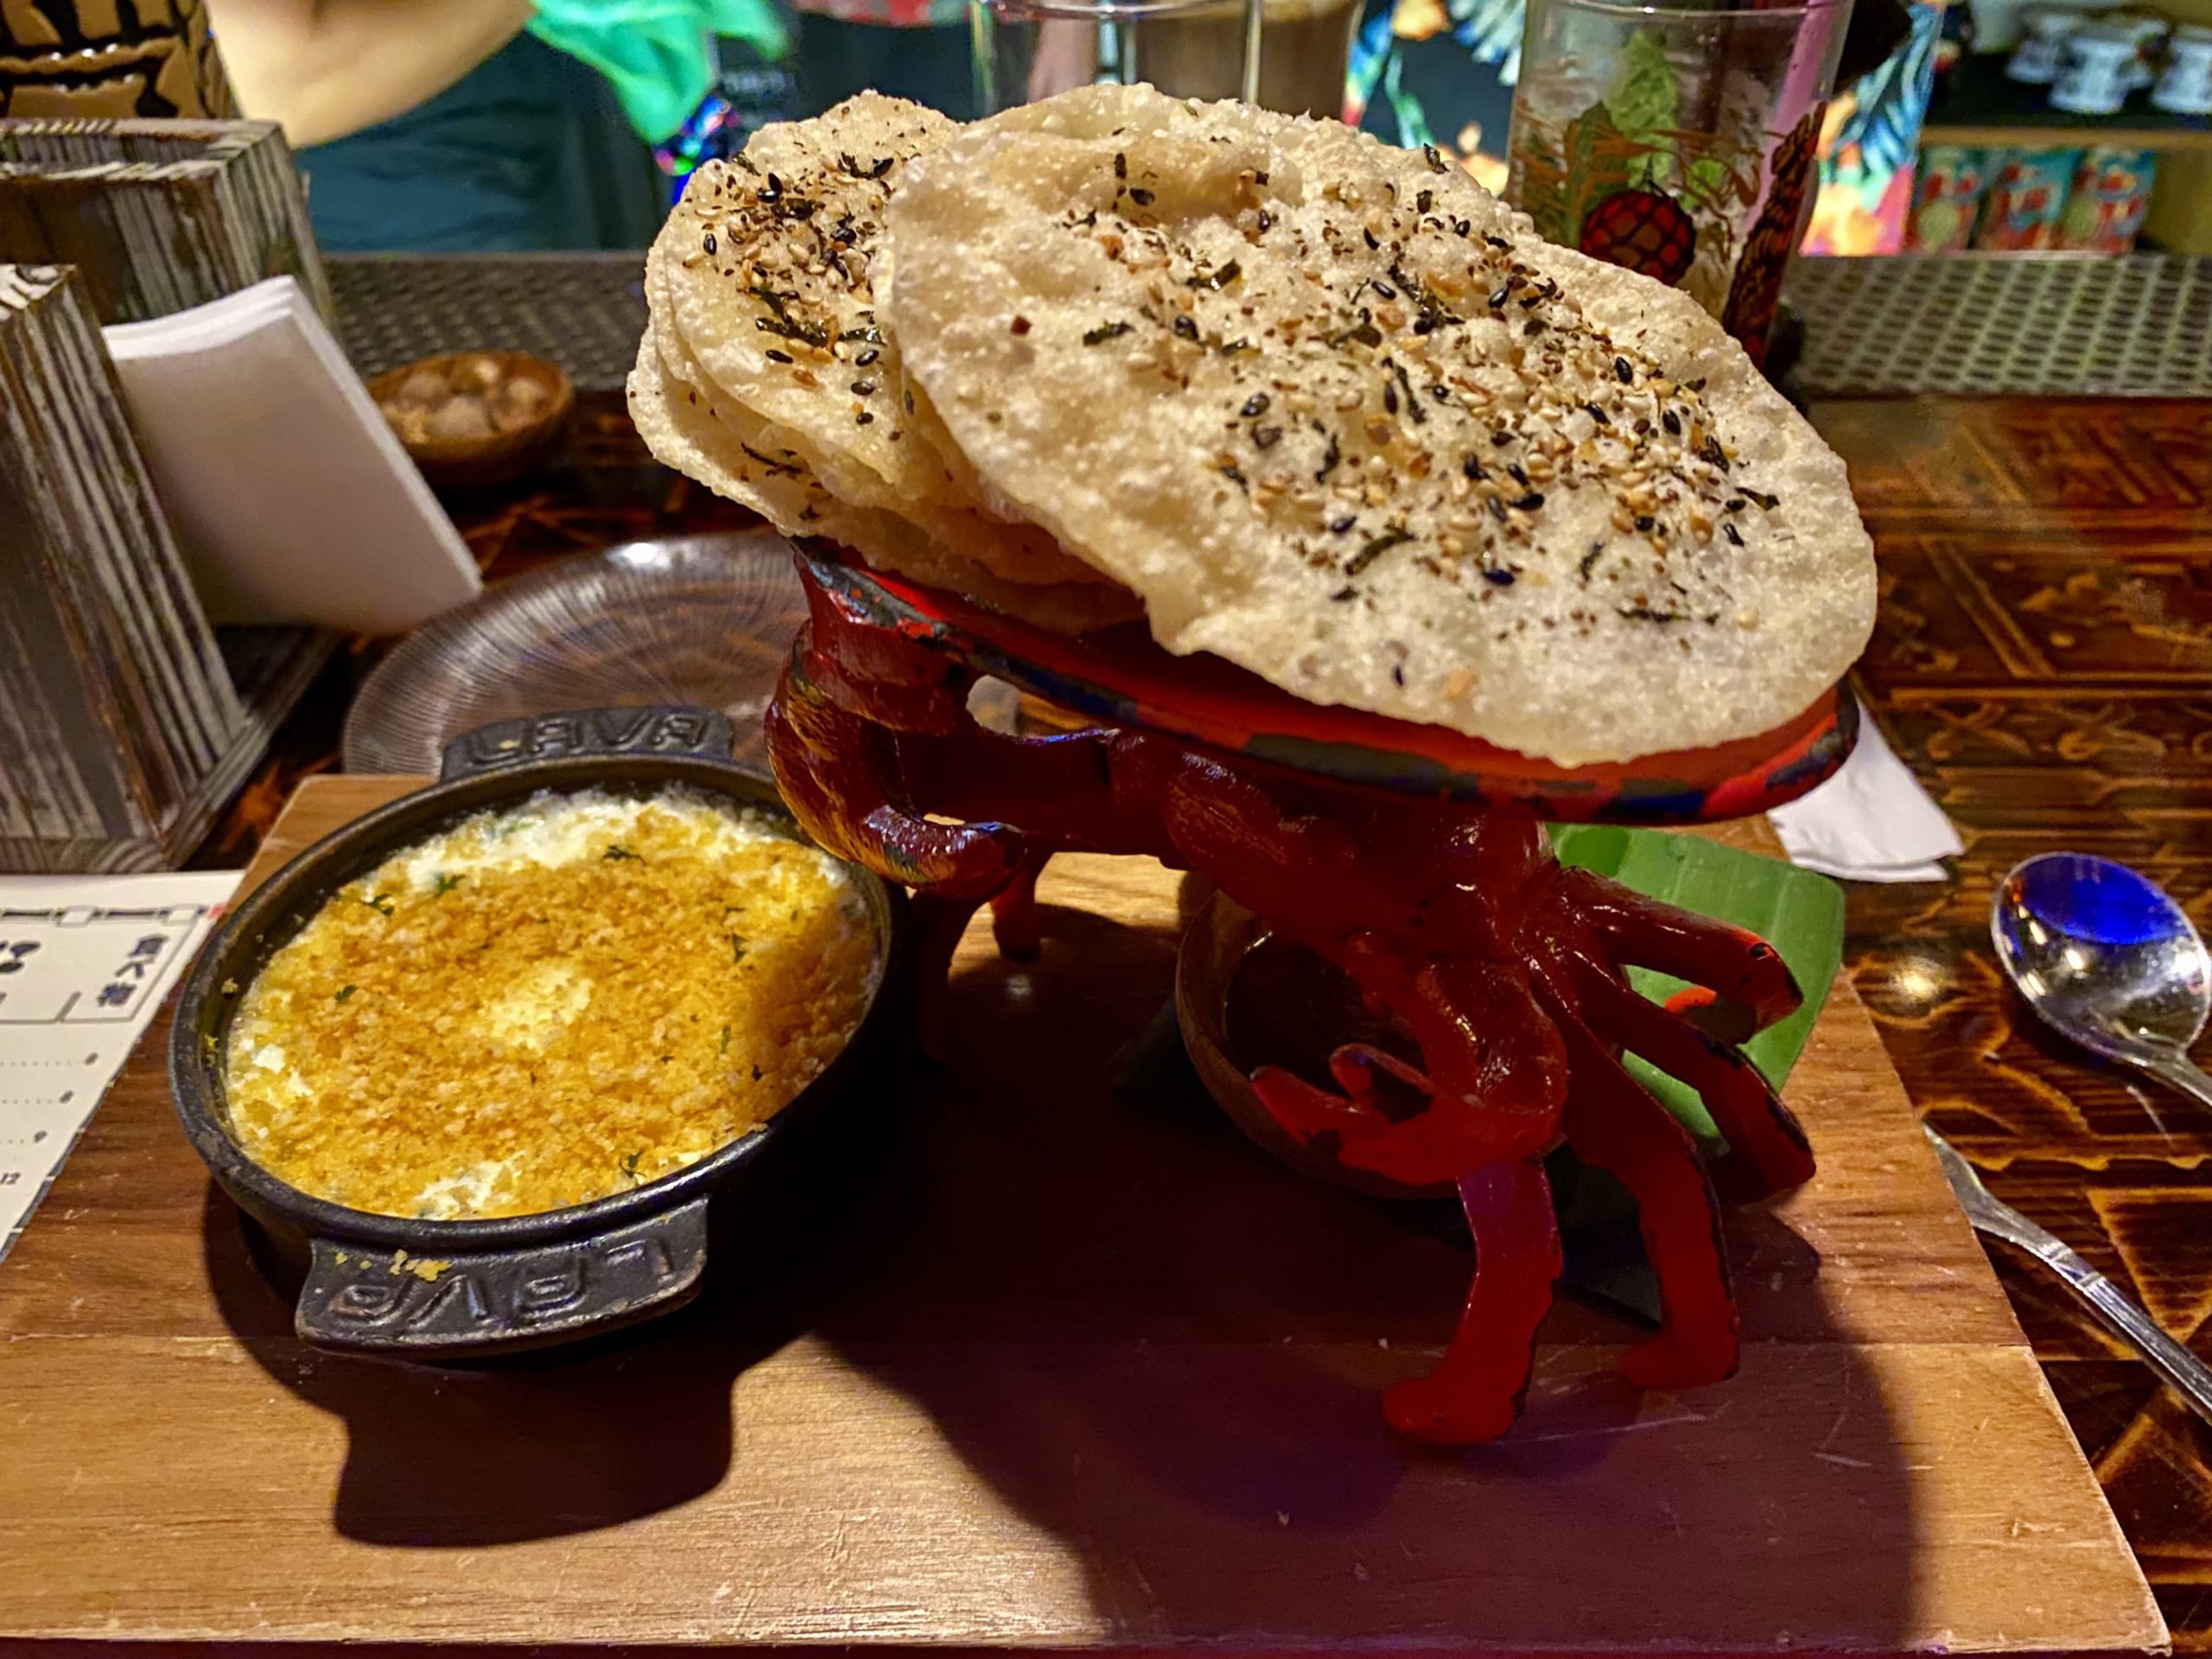 a crab shaped food on a wooden surface